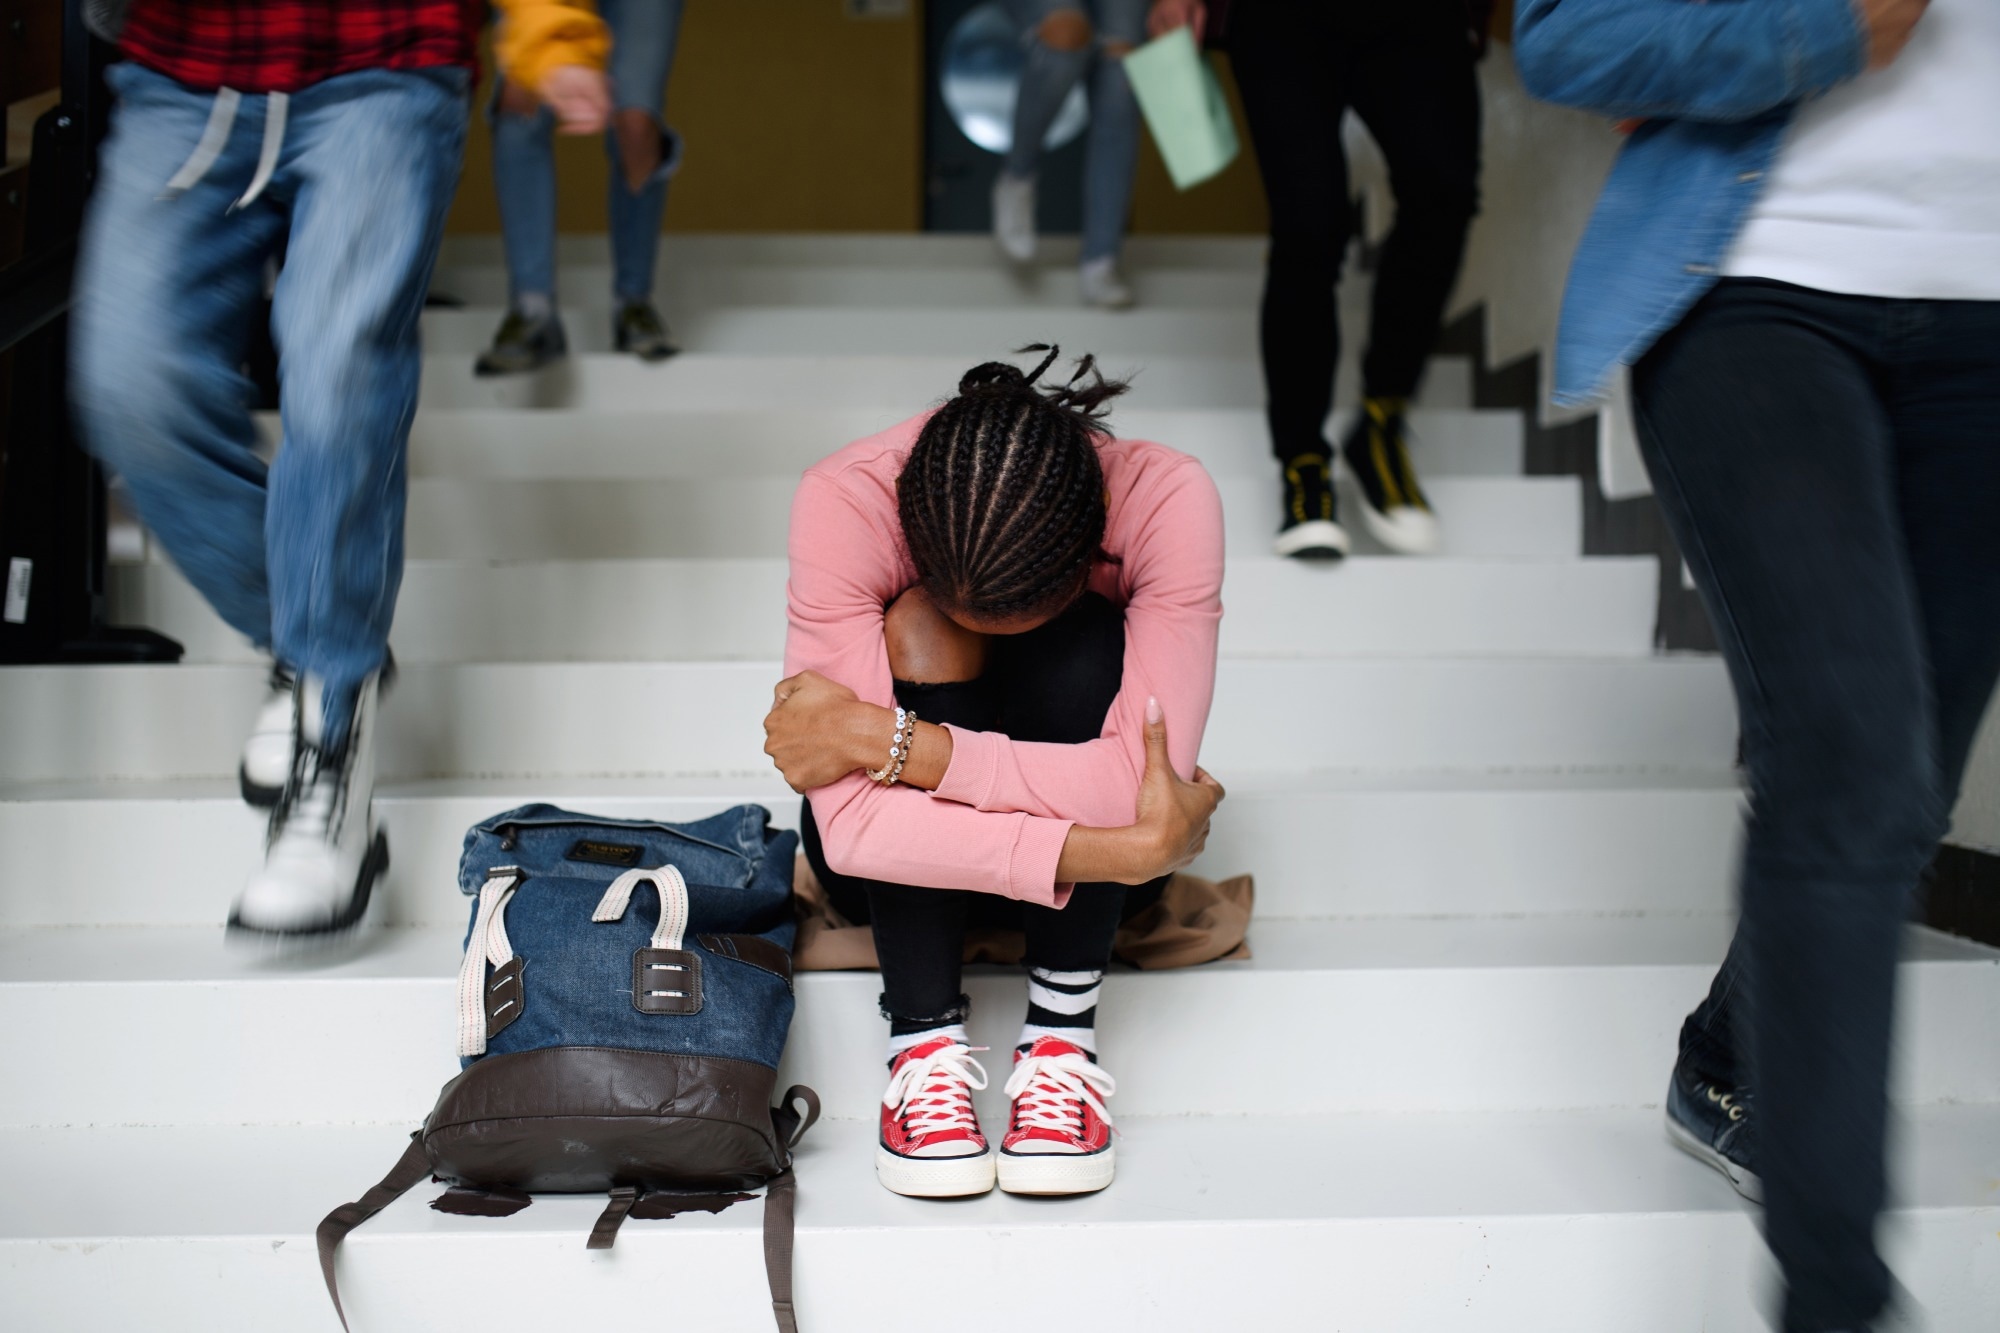 Study: Prevalence of Mental Health Diagnoses in Commercially Insured Children and Adolescents in the US Before and During the COVID-19 Pandemic. Image Credit: Ground Picture/Shutterstock.com